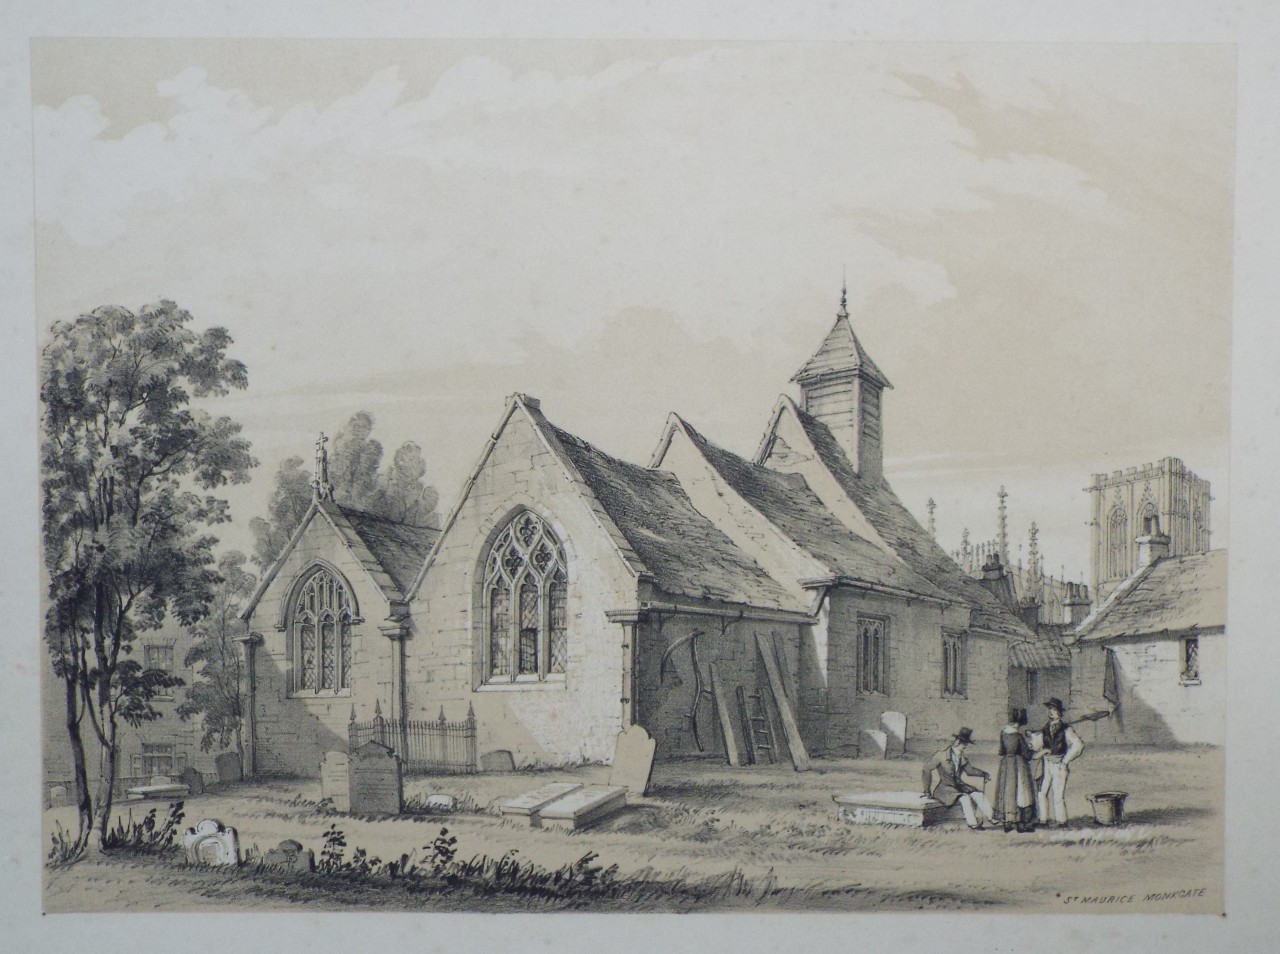 Lithograph - St. Maurice, Monkgate - Monkhouse